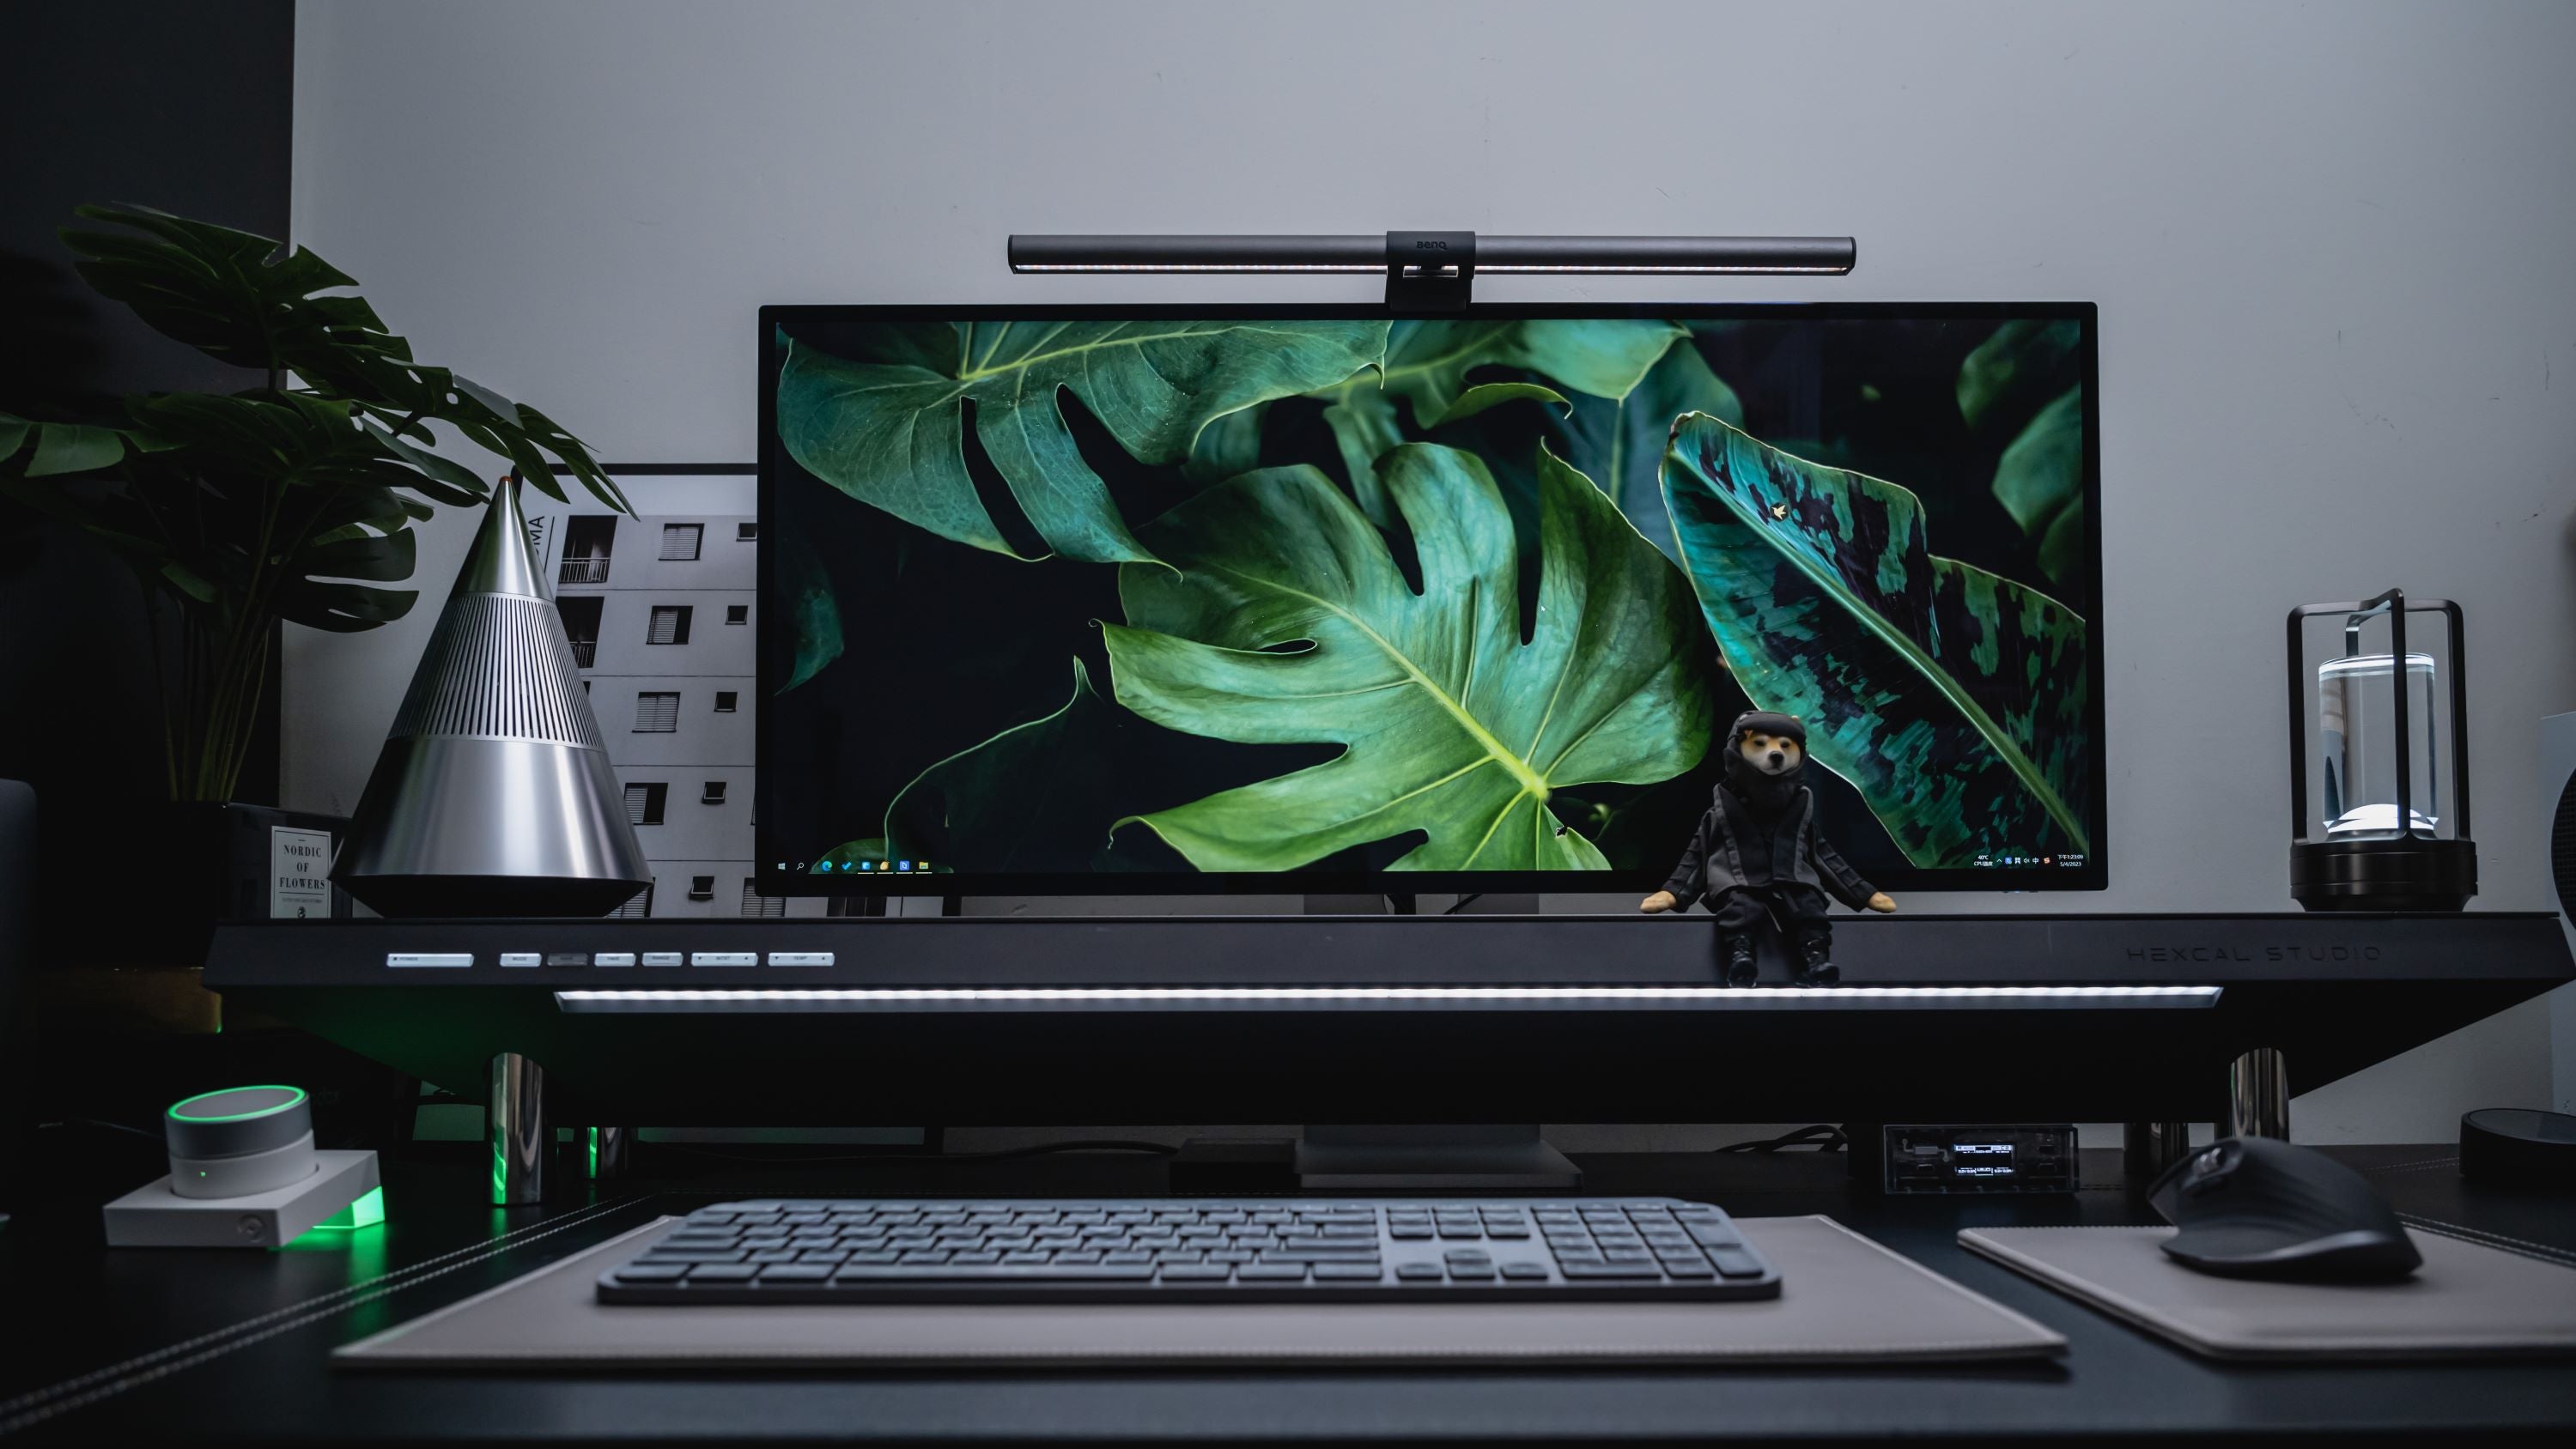 Hexcal Studio advanced all-in-1 workstation offers pro-level power